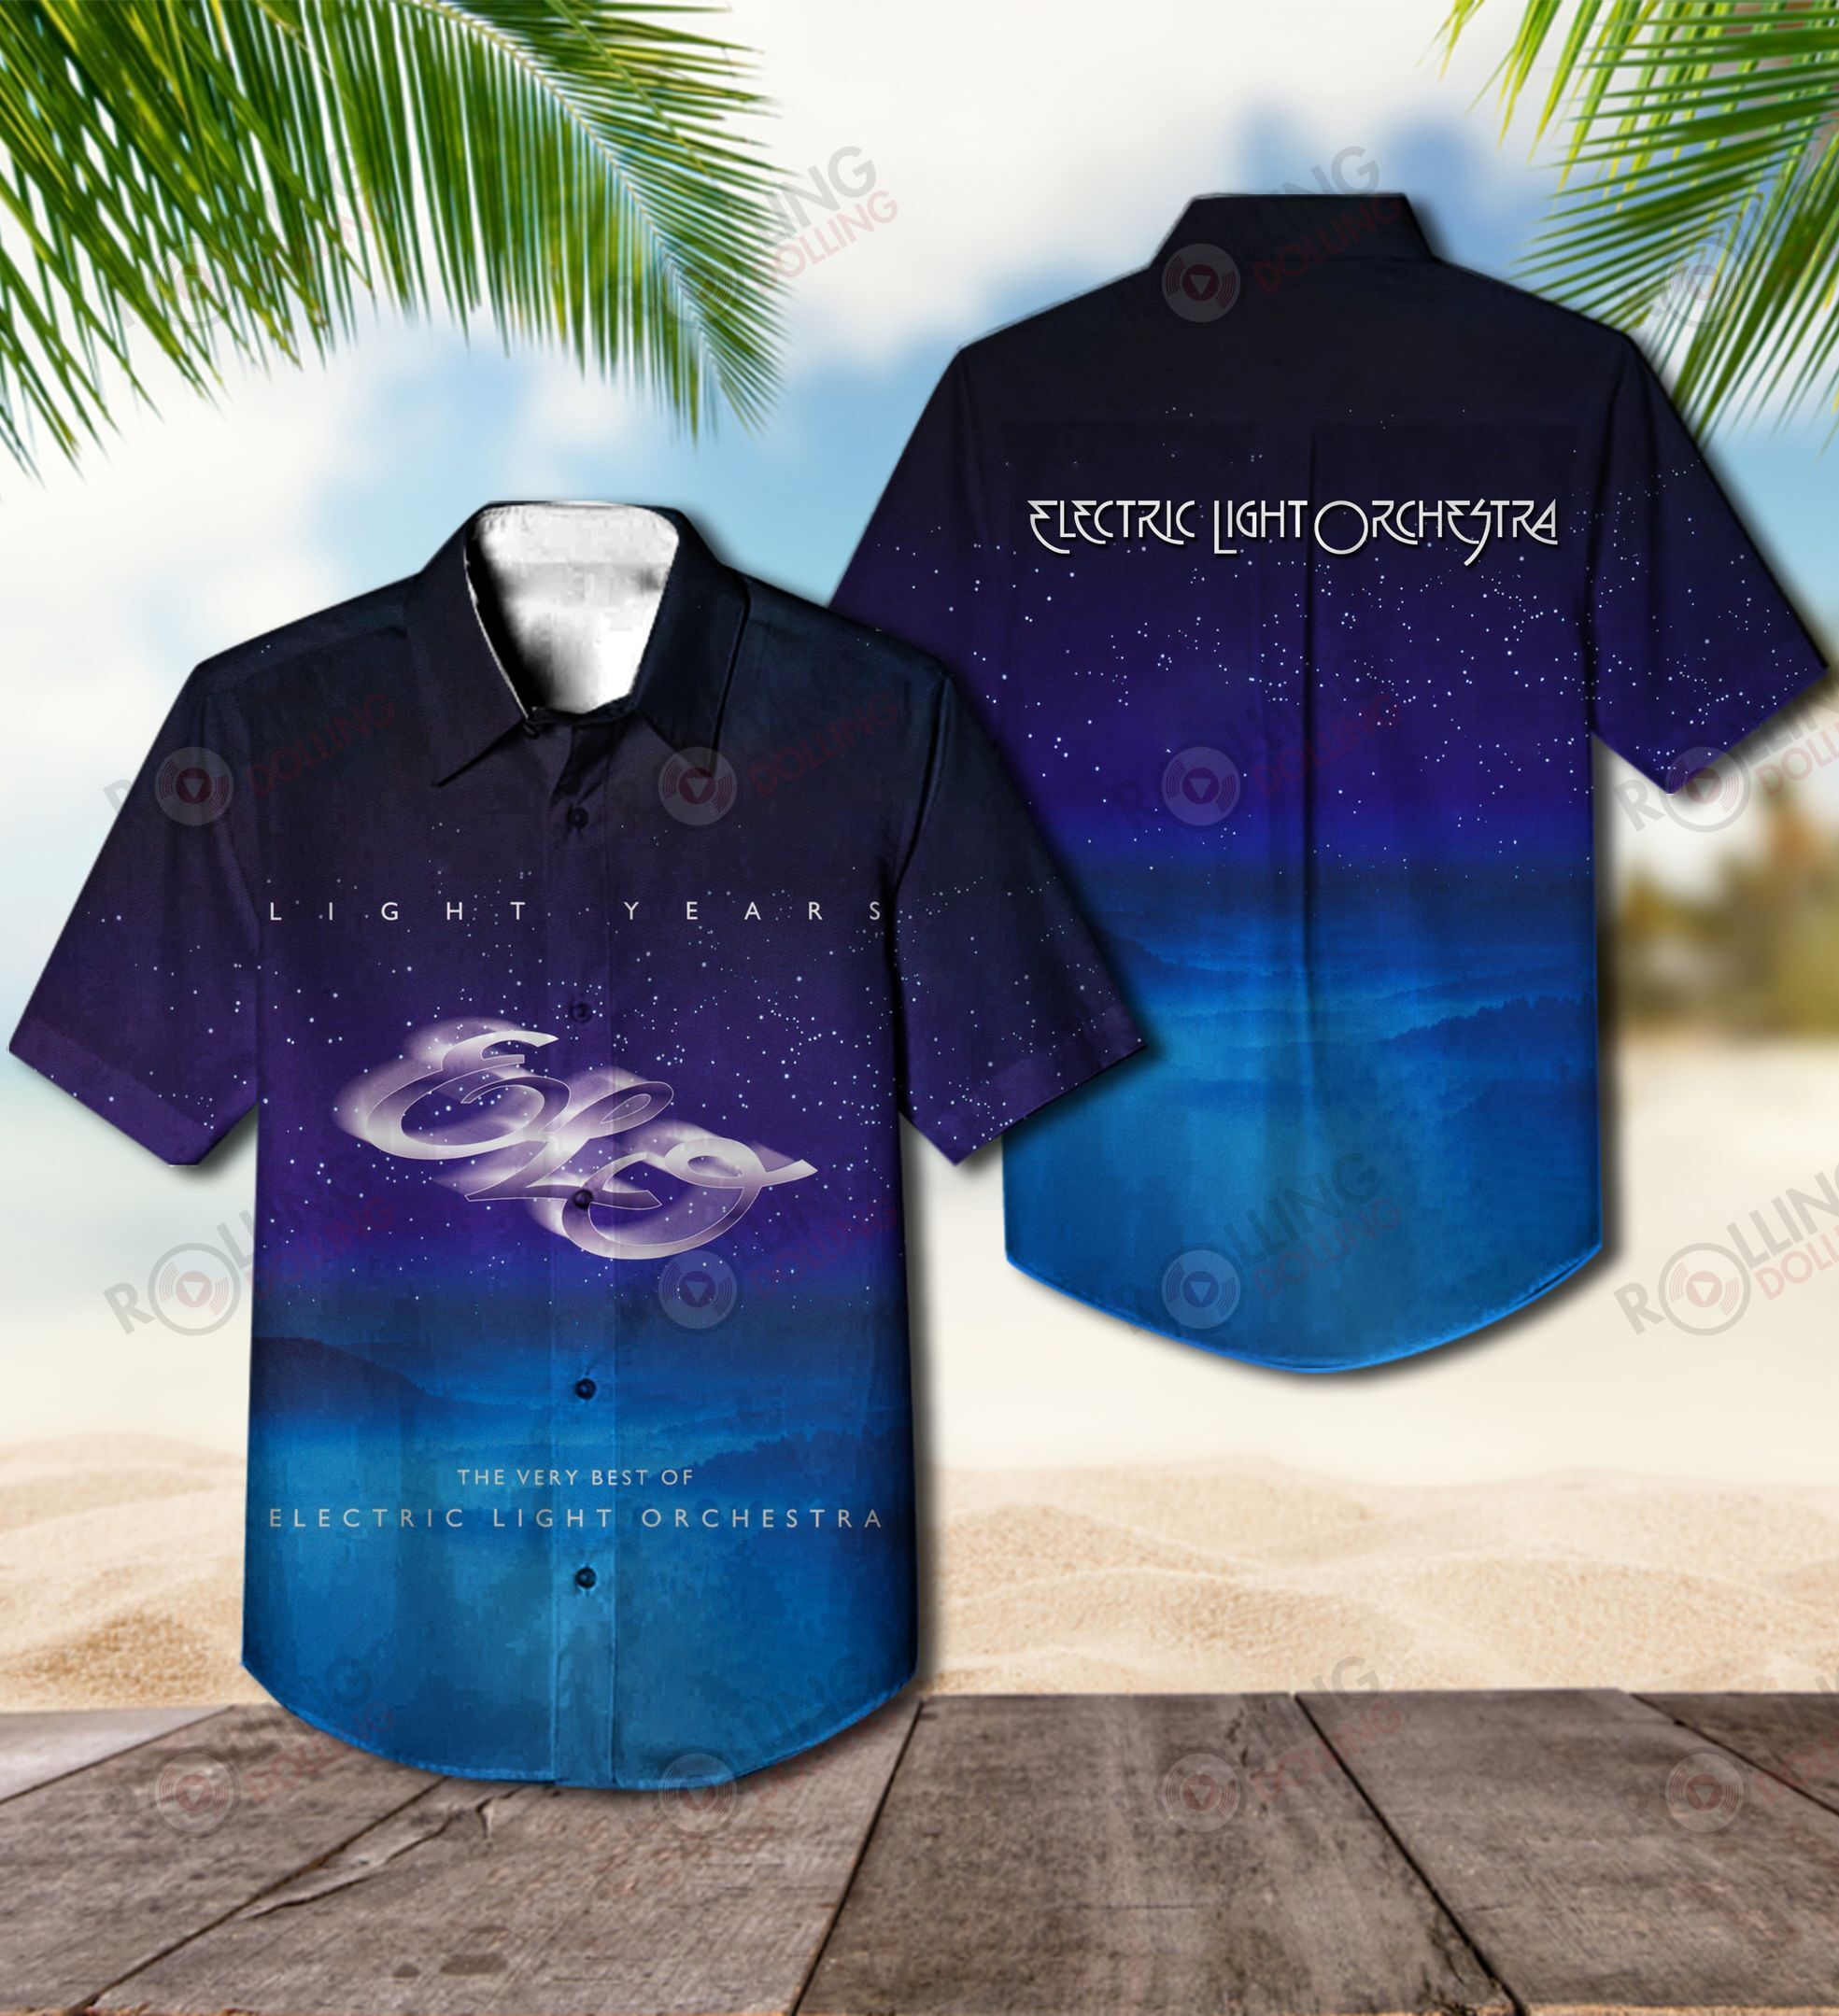 The Hawaiian Shirt is a popular shirt that is worn by Rock band fans 3